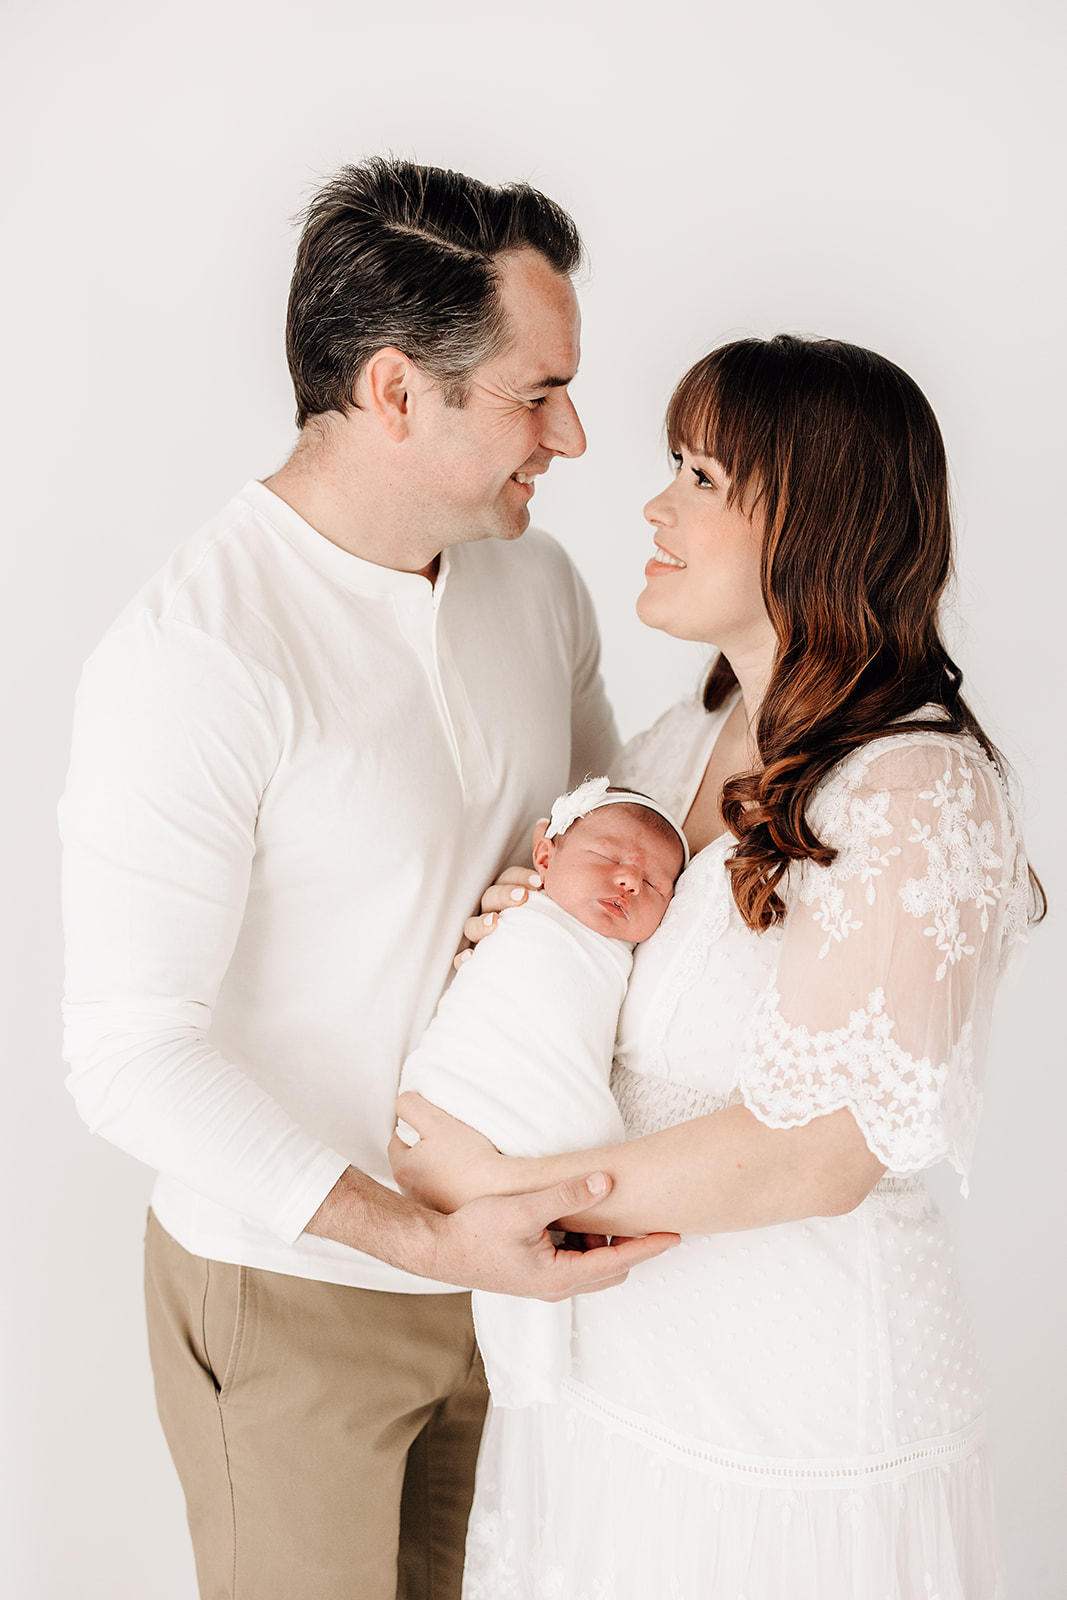 New parents stand together cradling their newborn baby daughter in a studio